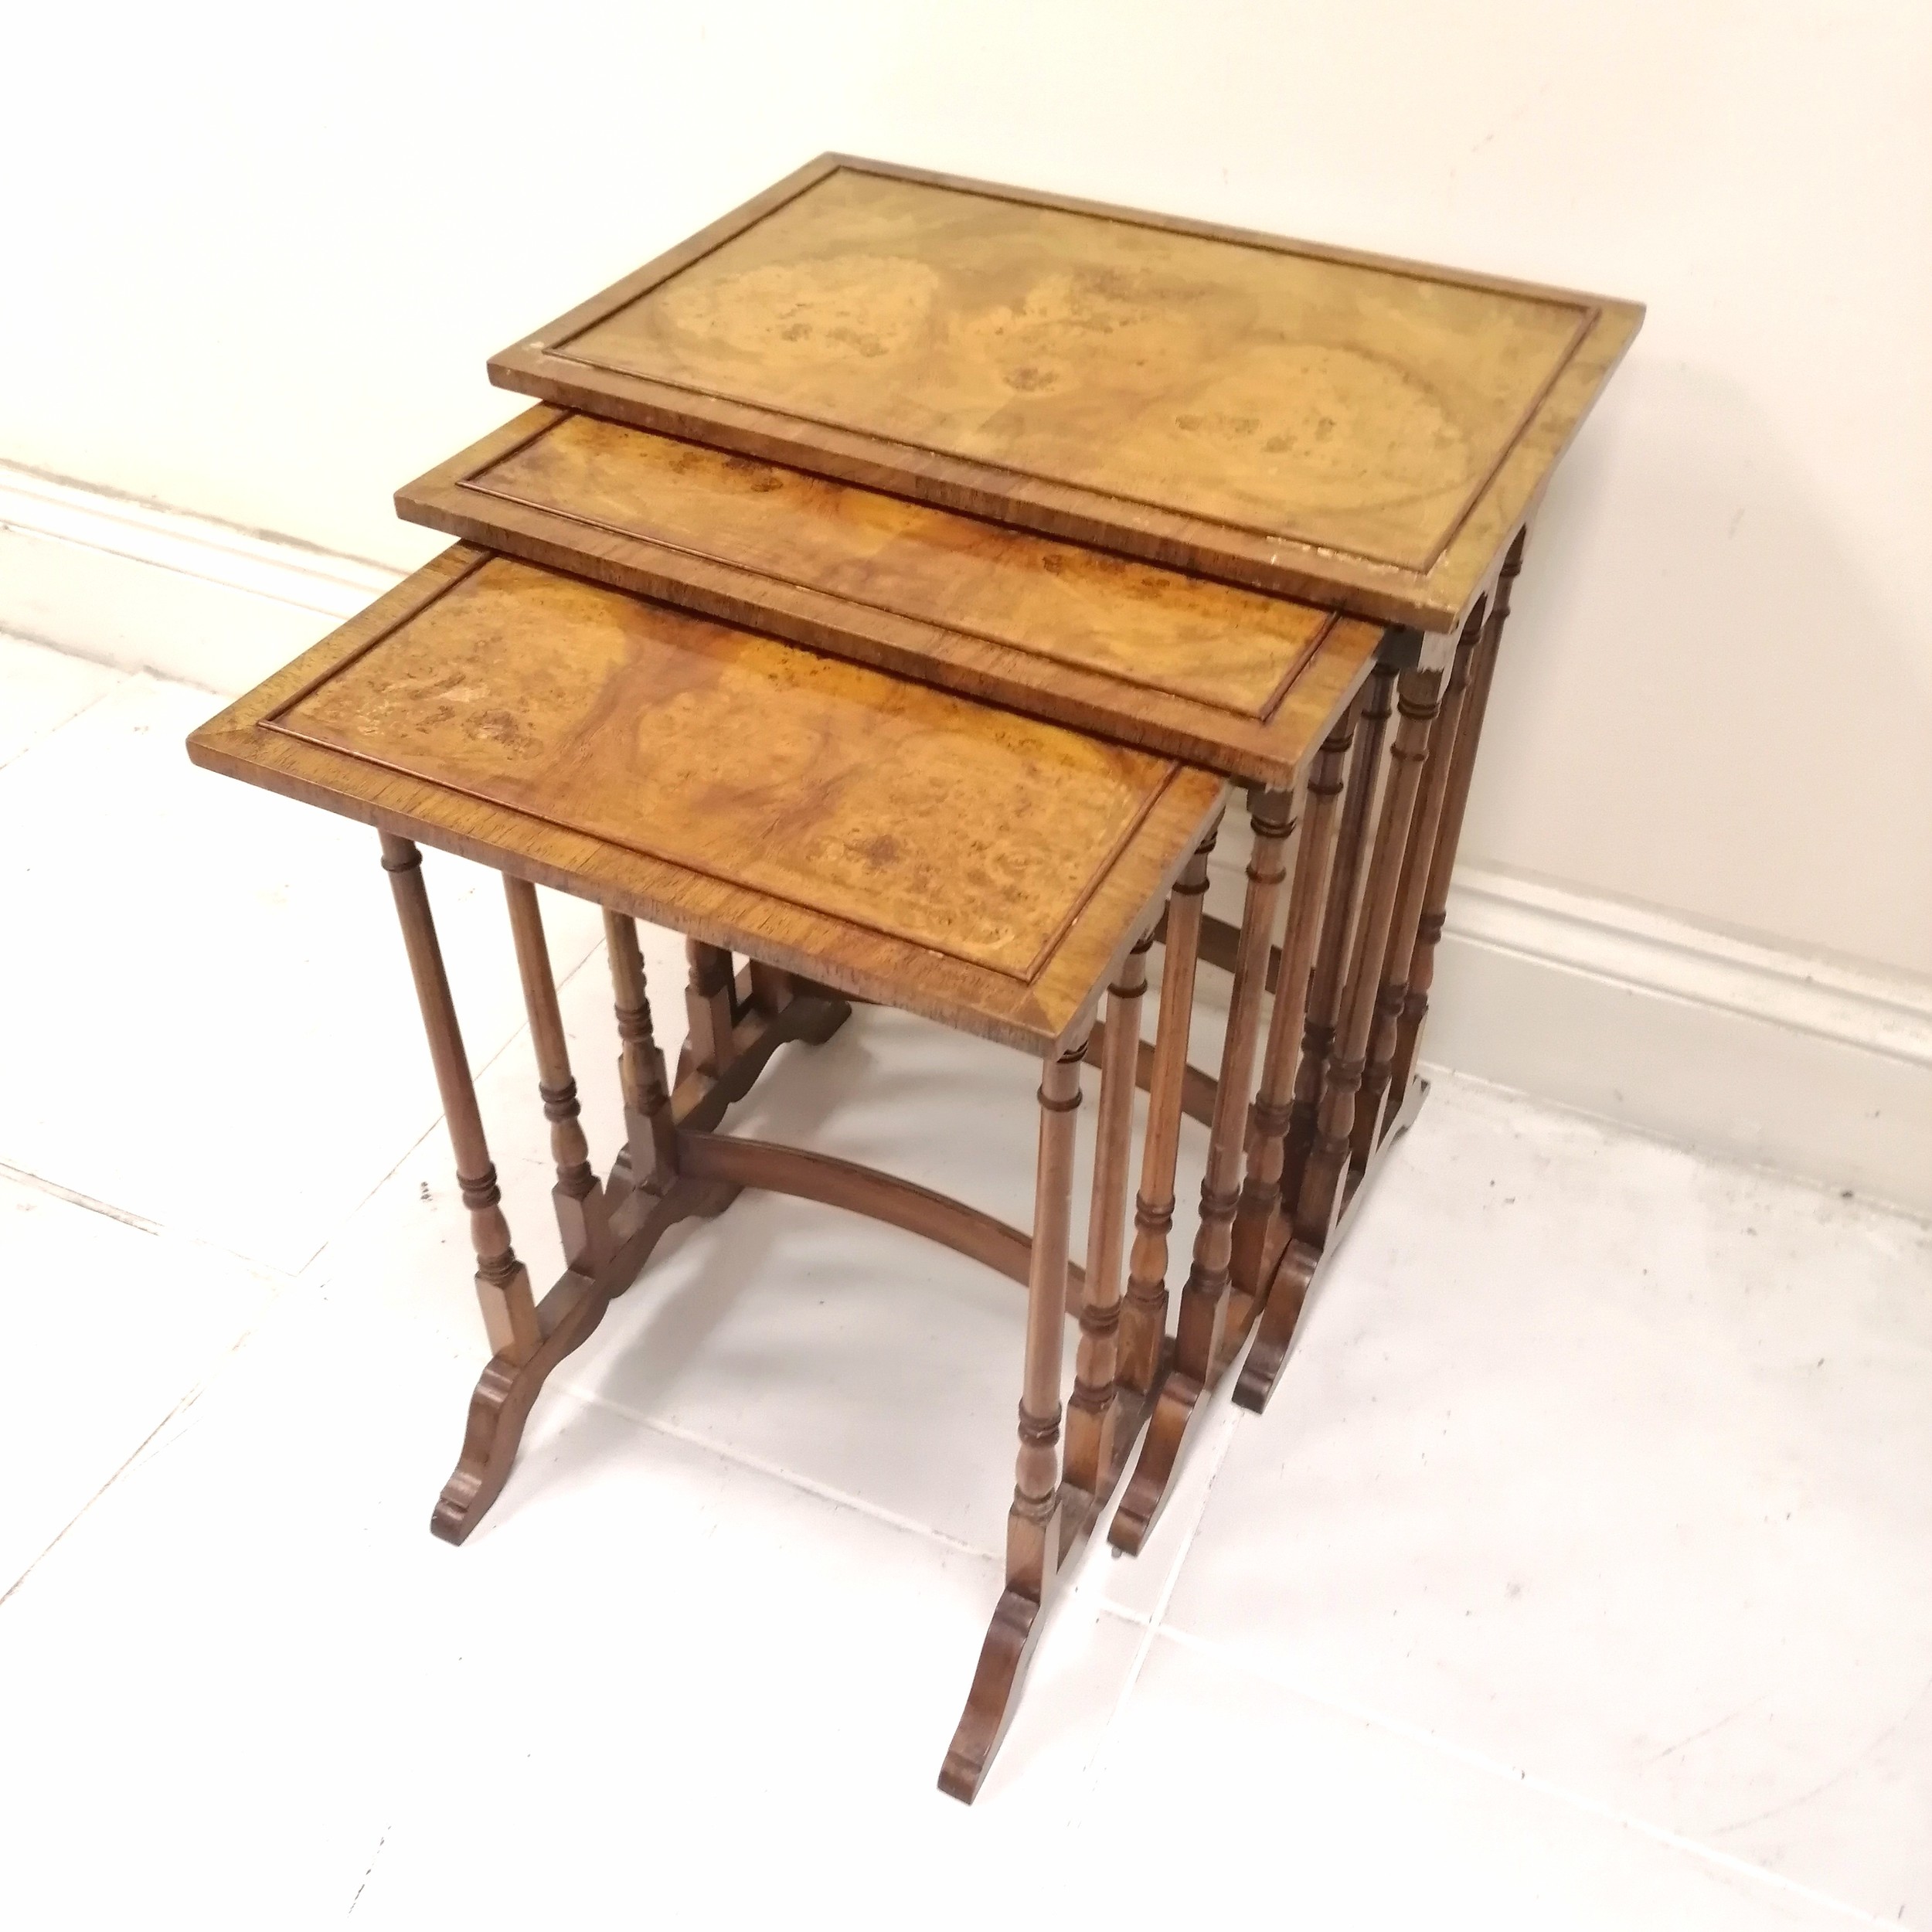 Nest of 3 Walnut reproduction tables - 51cm wide x 35cm deep x 60cm high & in used condition - Image 5 of 5